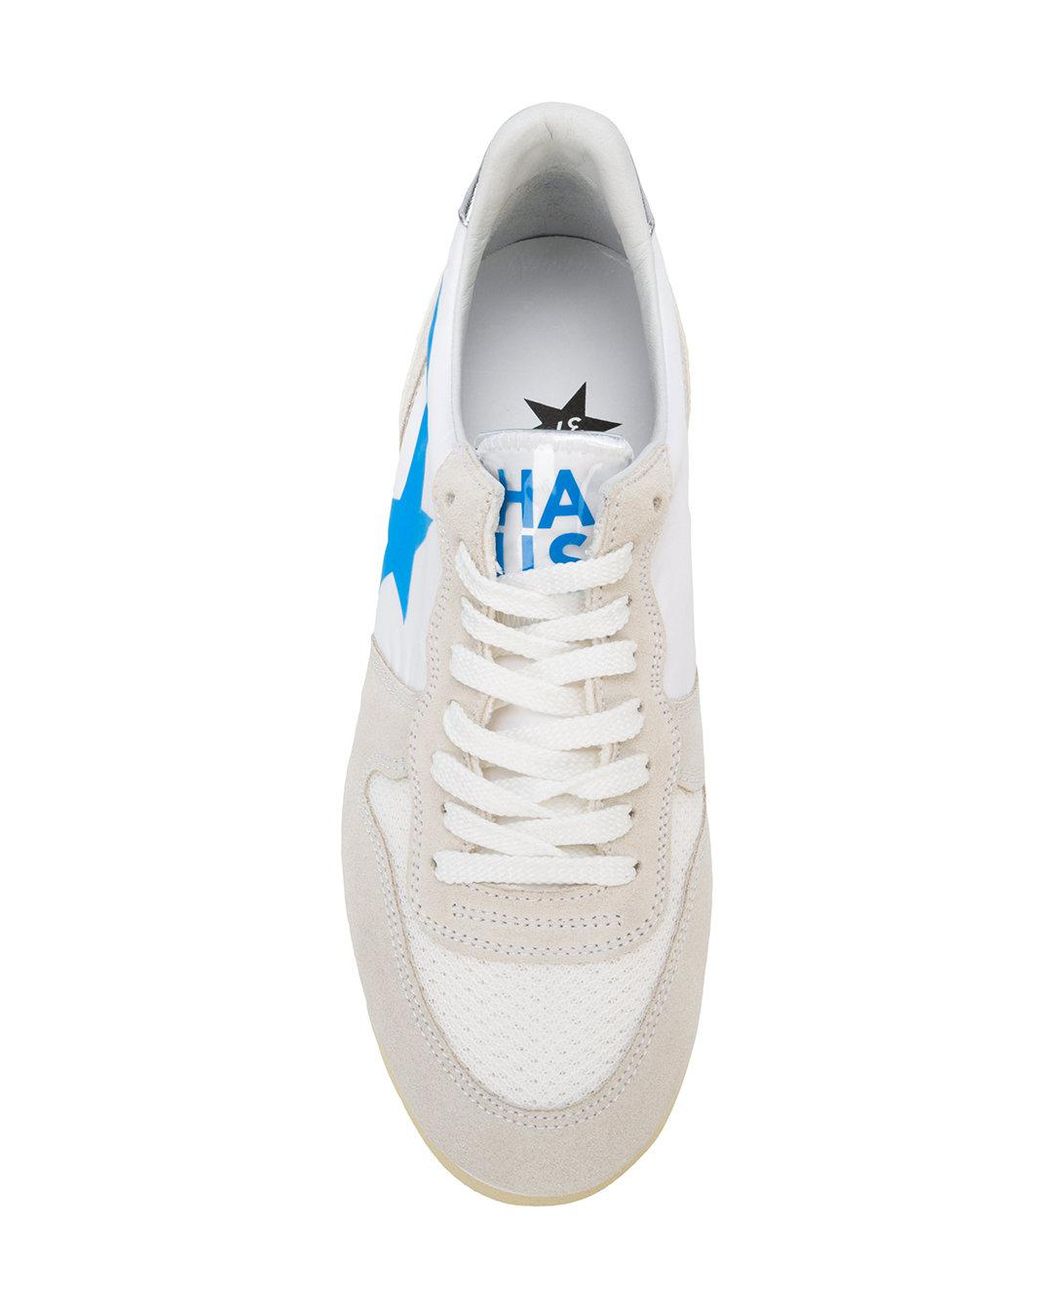 haus by golden goose deluxe brand White Haus Swan Sneakers